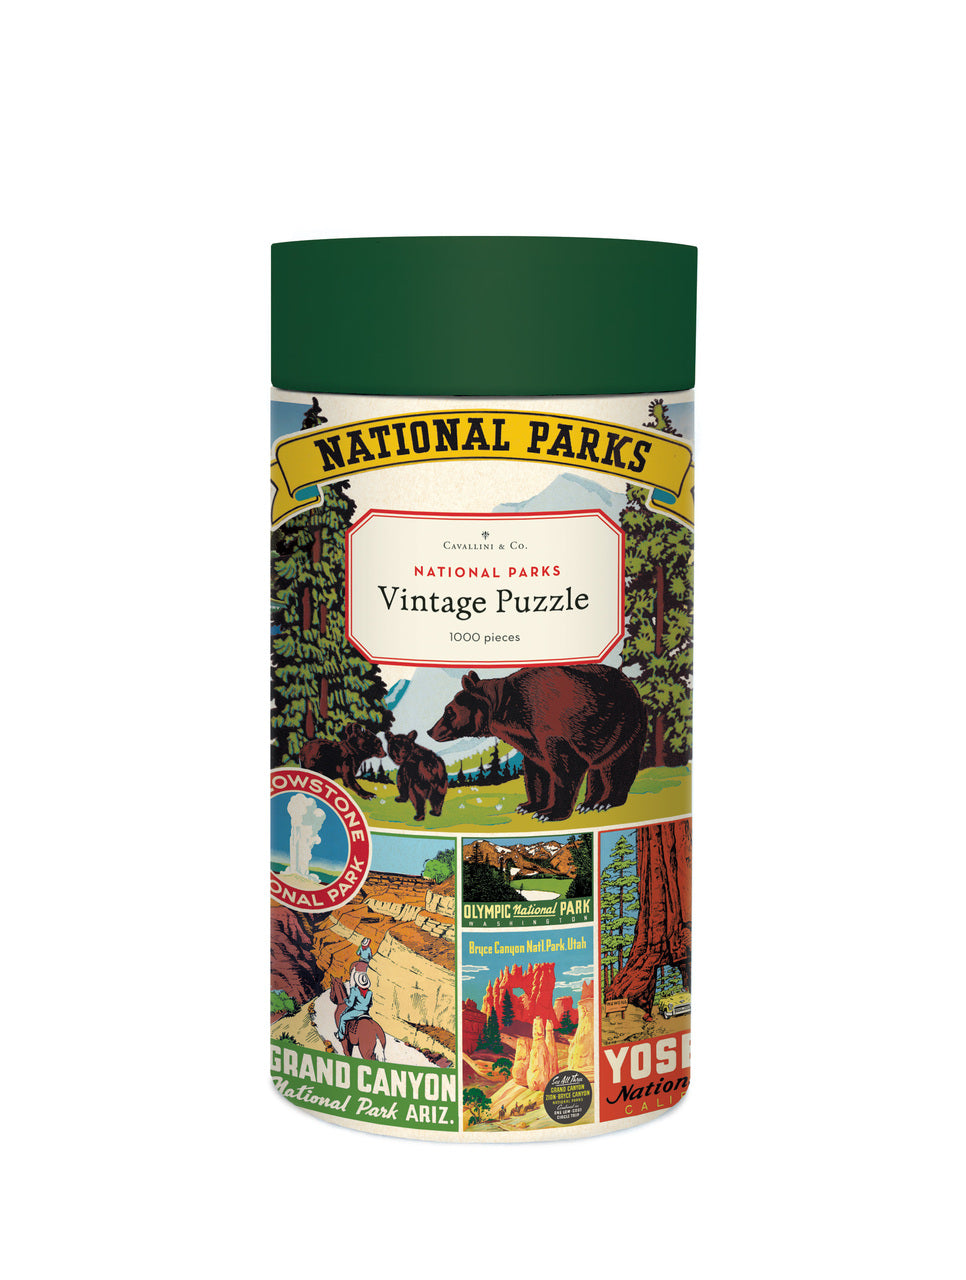 Cavallini & Co. National Parks 1000 piece puzzle features their National Parks Decorative wrap, a collage of vintage National Parks logos and designs.